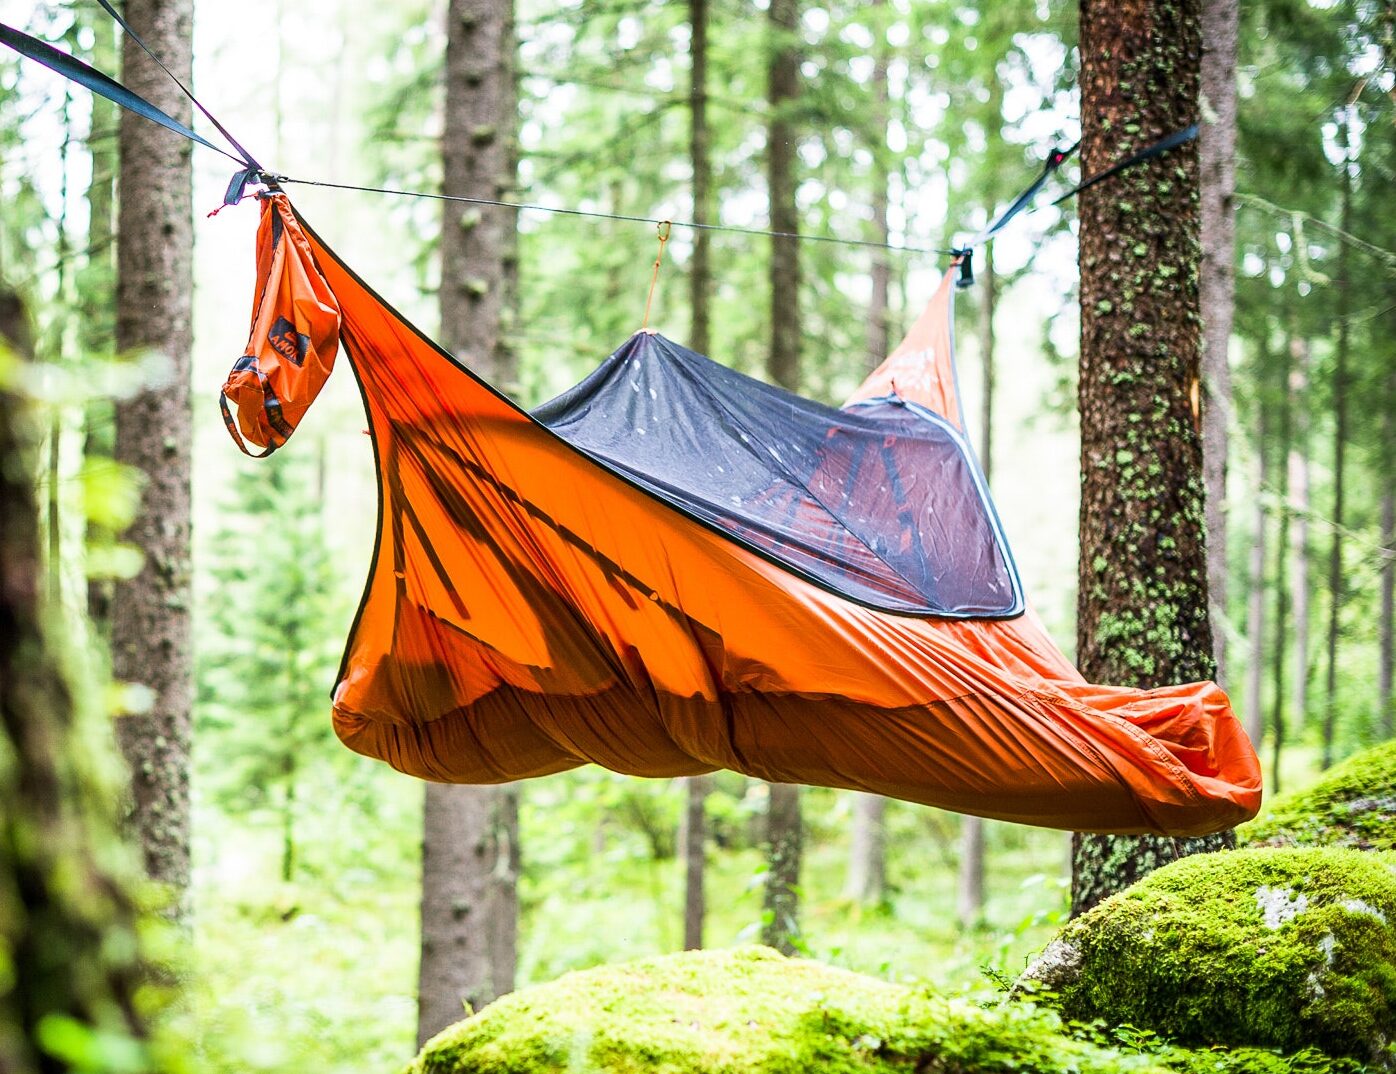 Get a deep, restful sleep and wake up refreshed with the Amok Draumr 5.0 Hammock